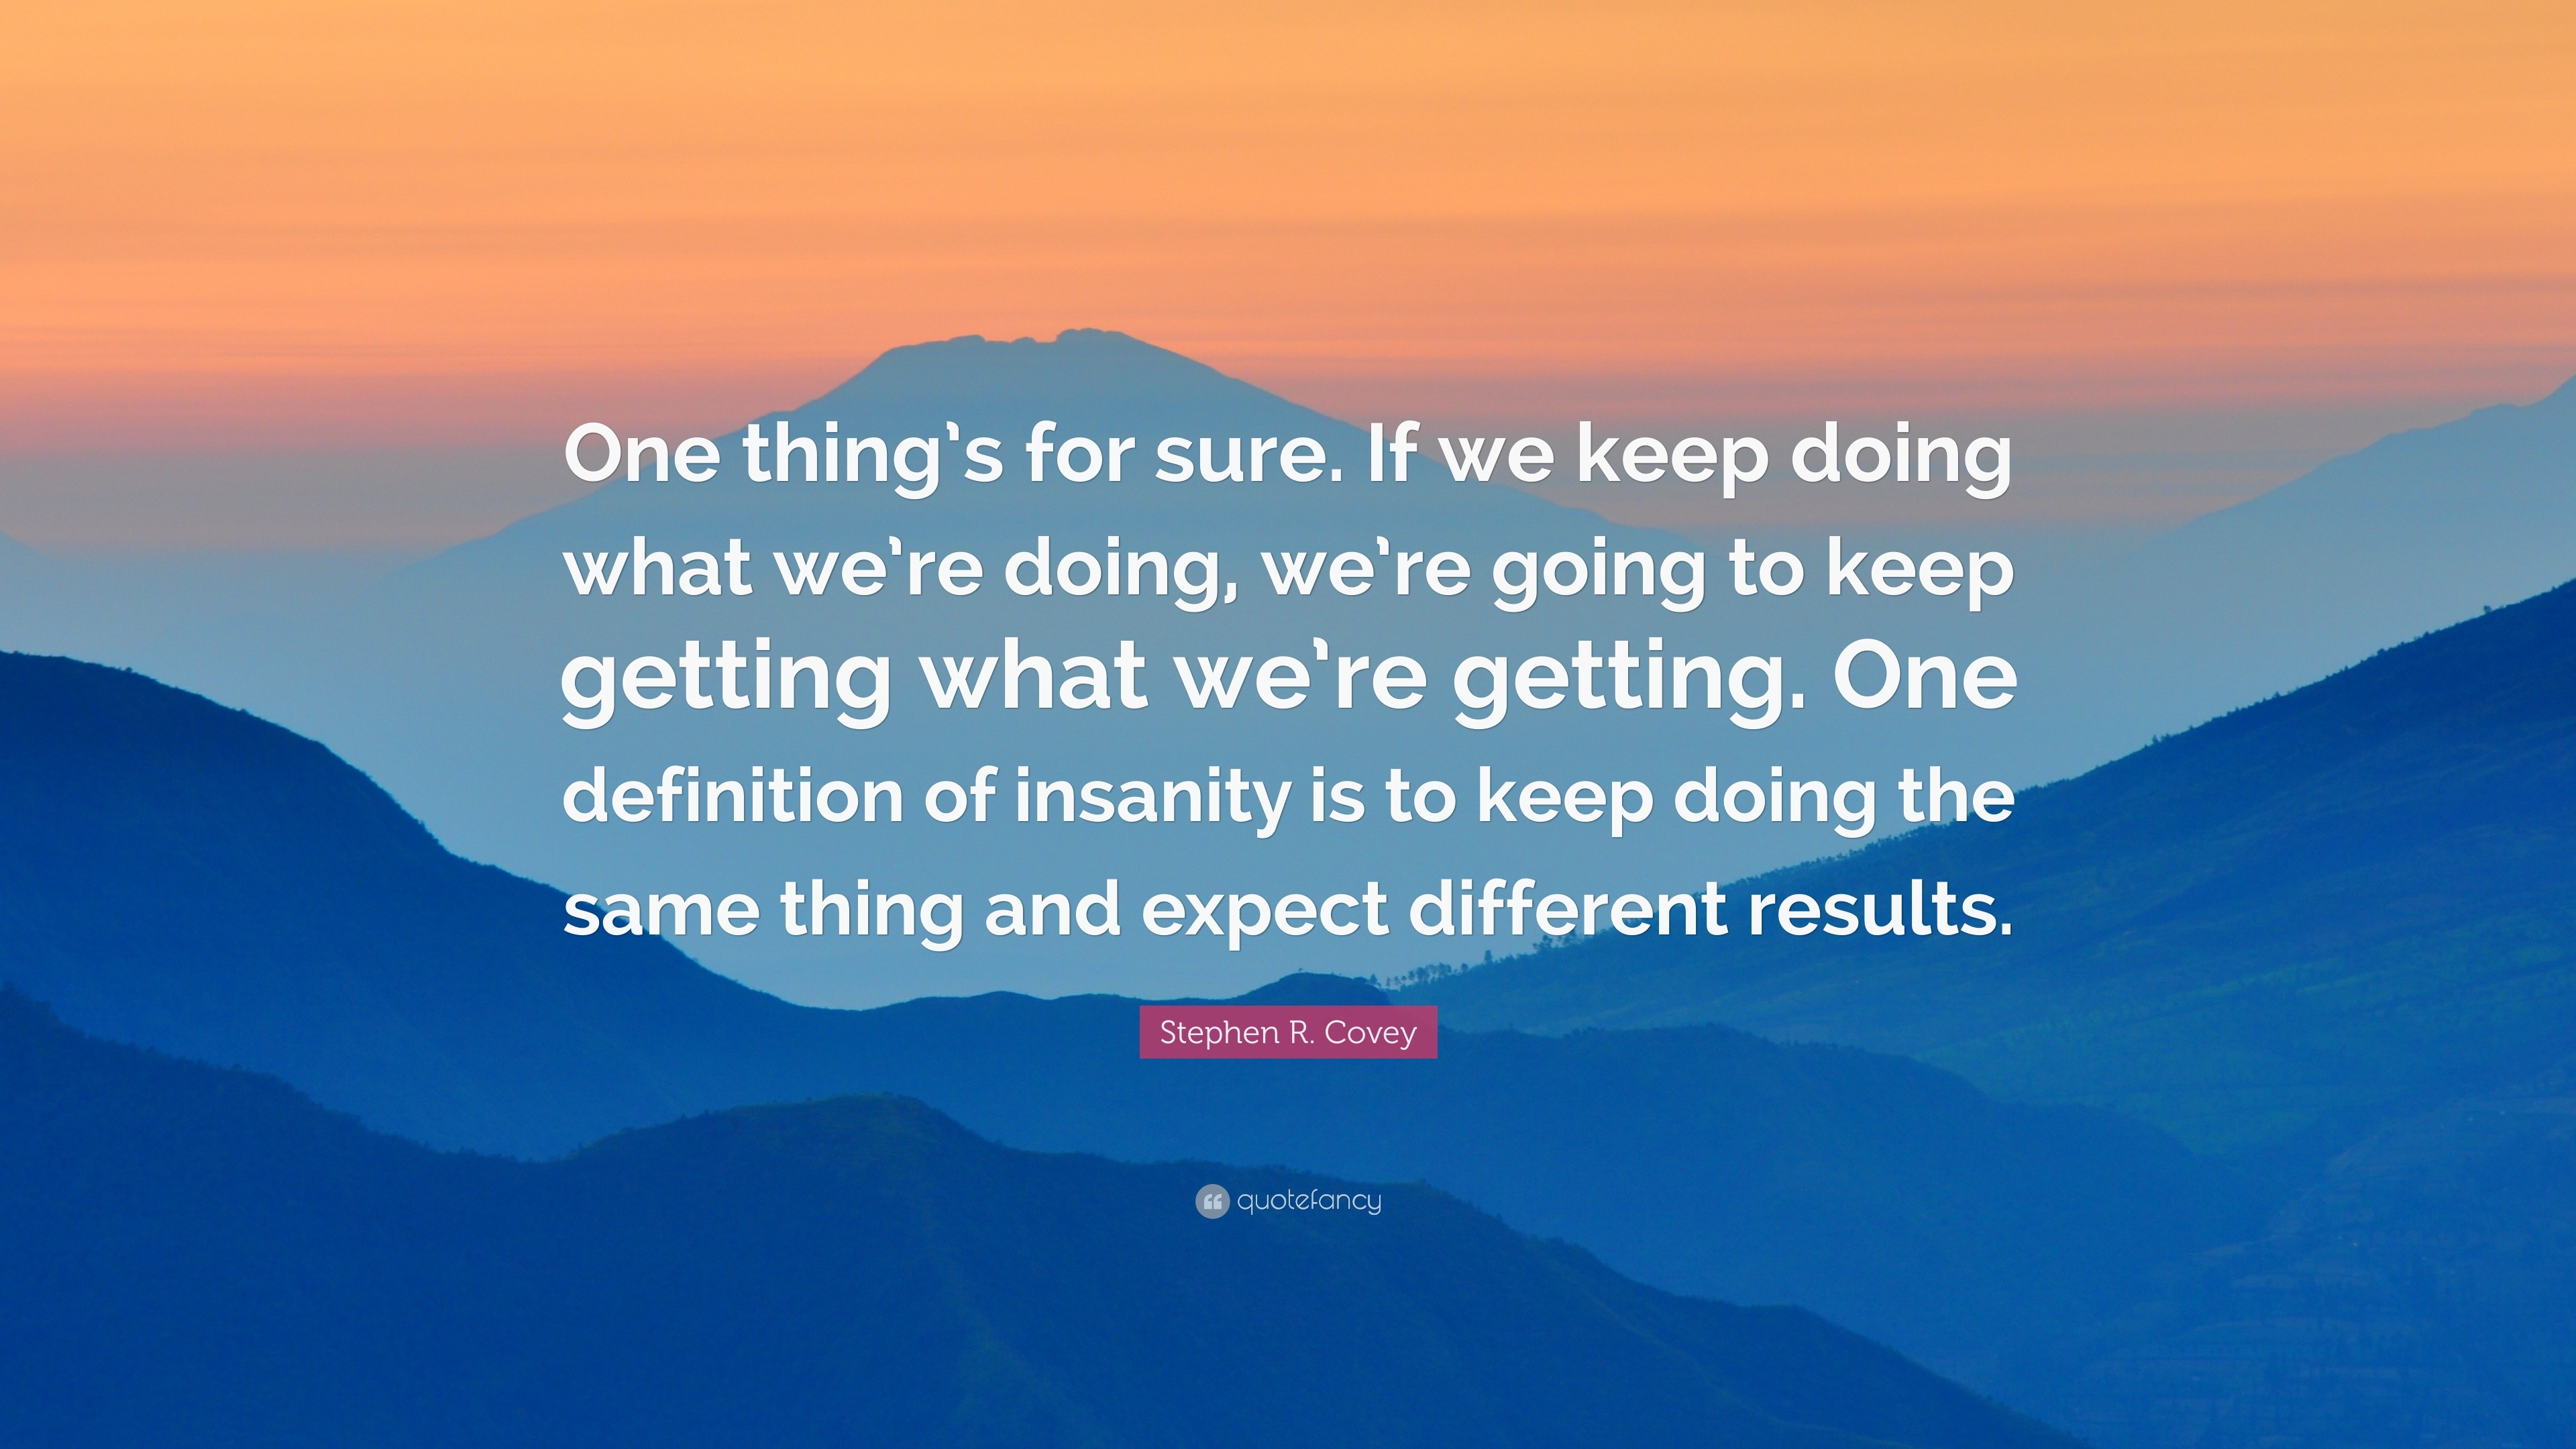 Stephen R Covey Quote One Thing S For Sure If We Keep Doing What We Re Doing We Re Going To Keep Getting What We Re Getting One Definition